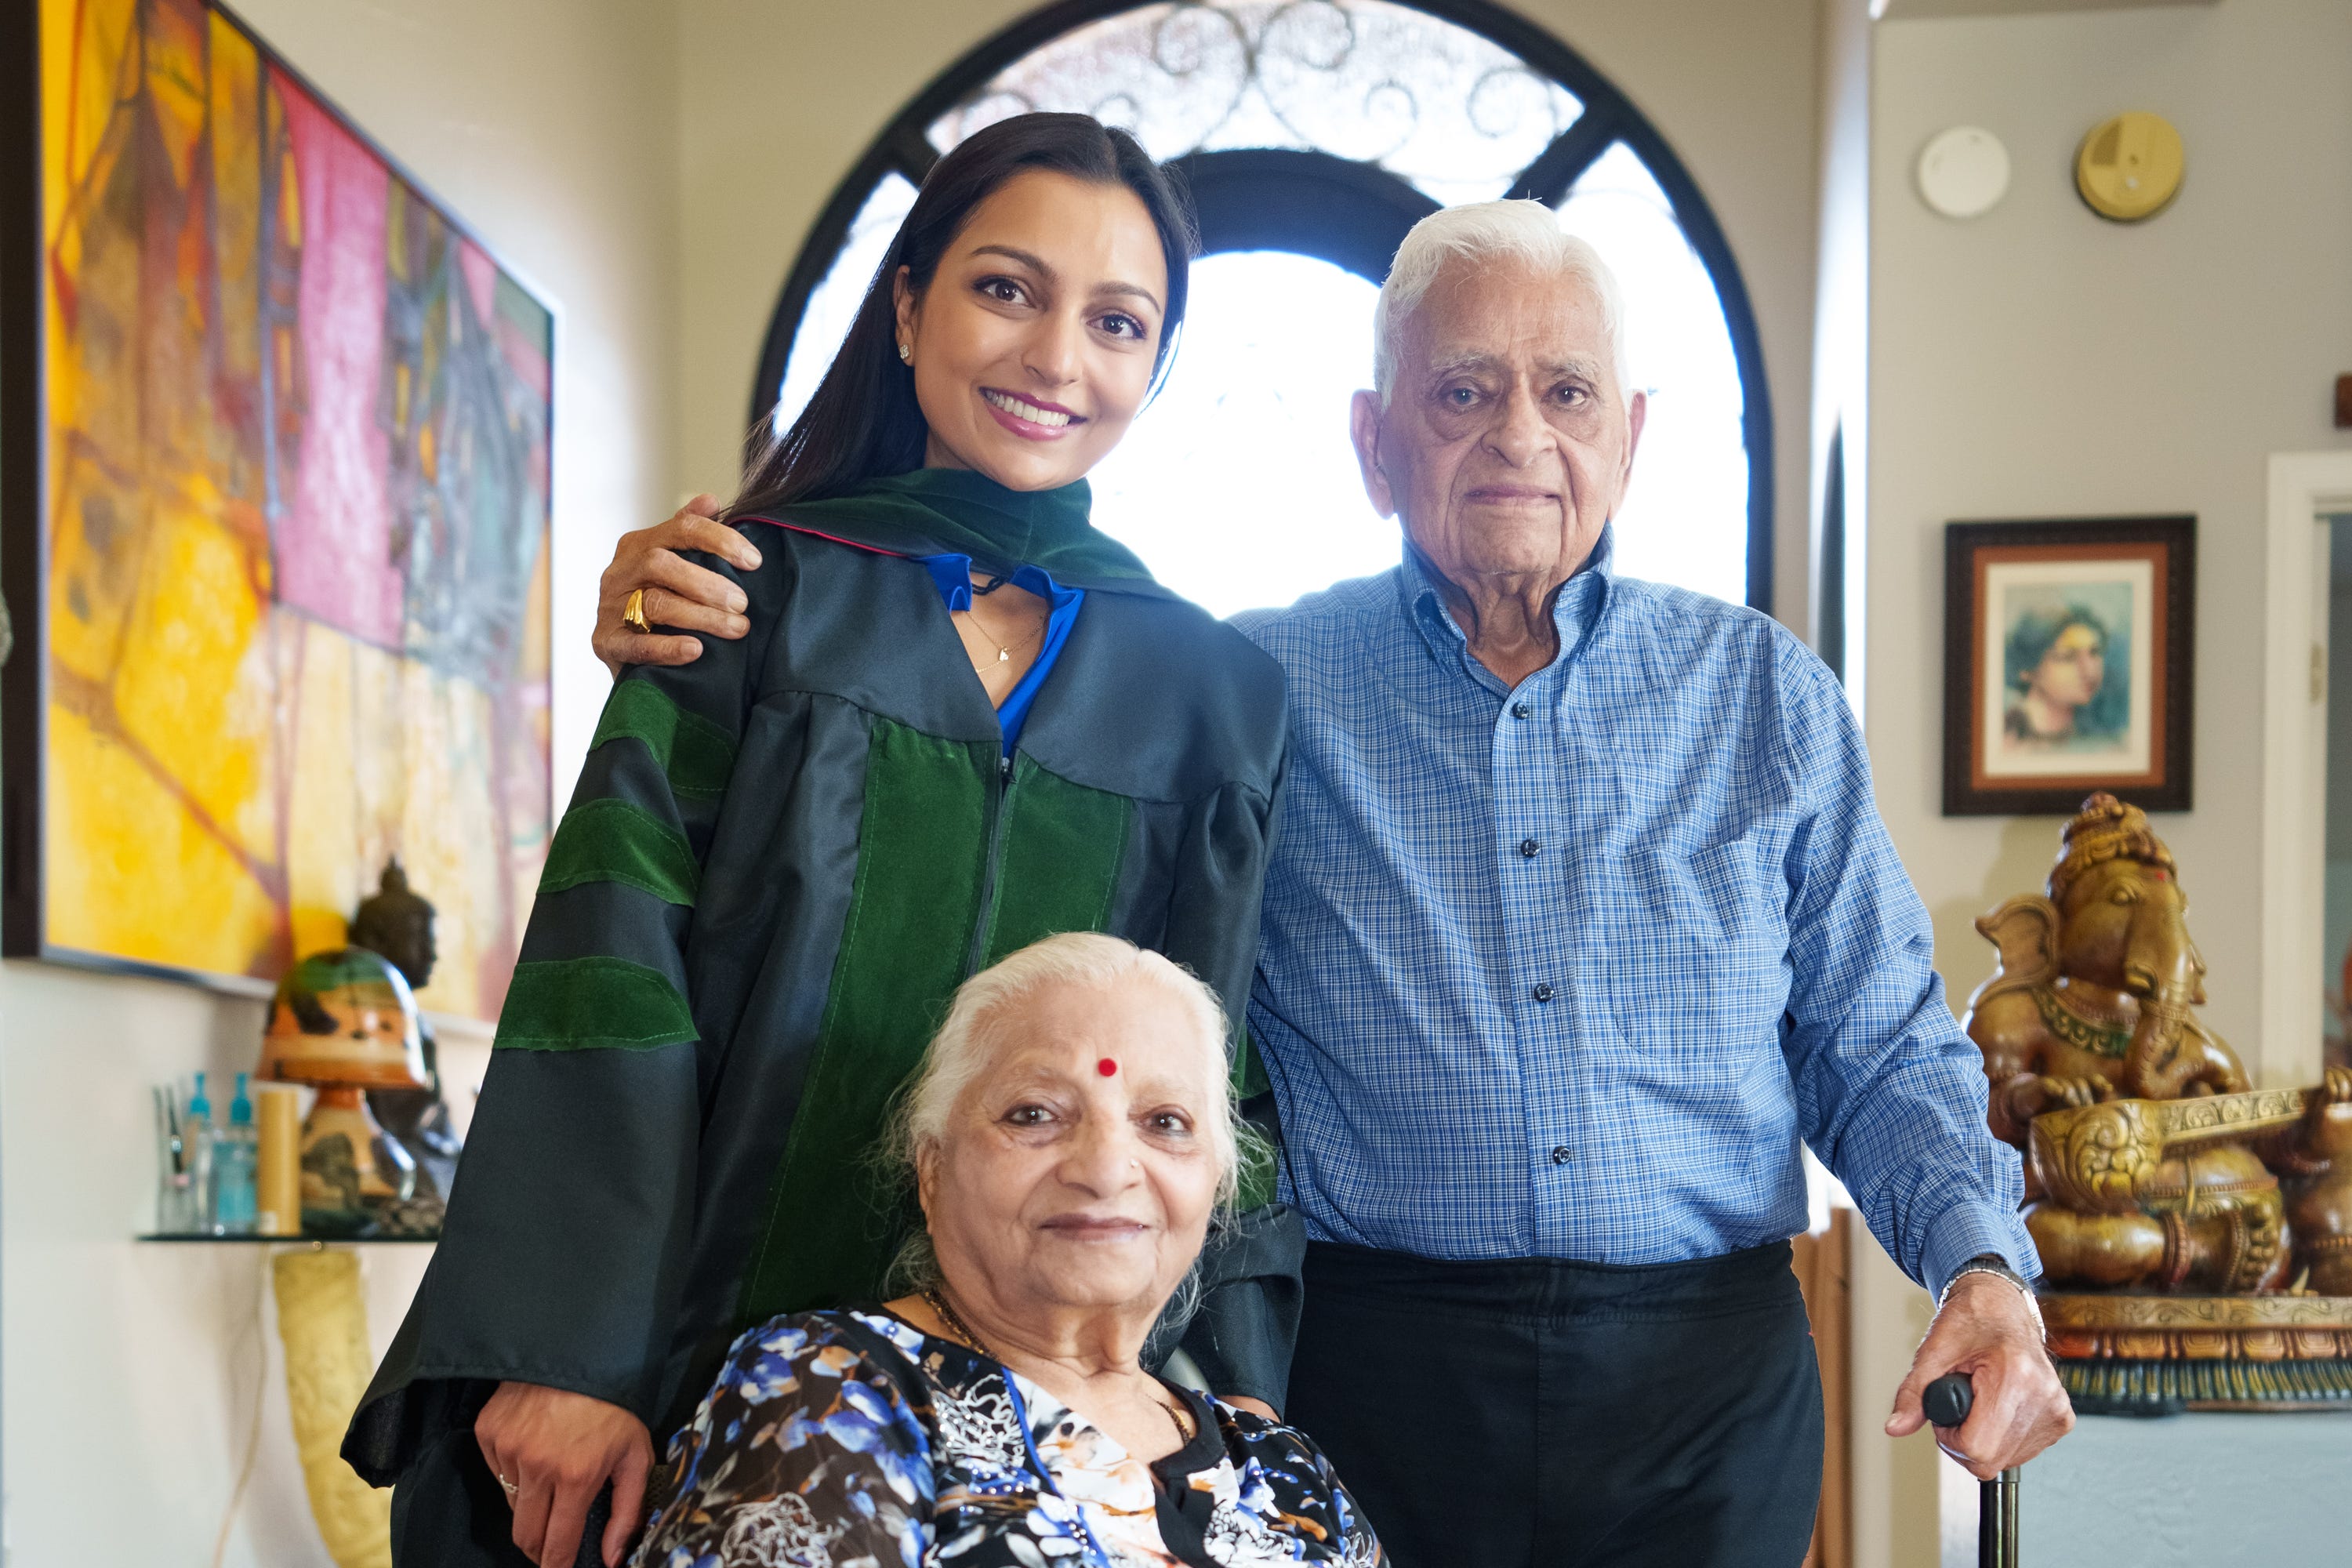 Graduate of University of Arizona's Phoenix medical school, Maya Patel (left), poses for a photo with her grandparents Bhaichand Dholakia (right) and Pushpaben Dholakia (front) in her home in Scottsdale on May 7, 2022.